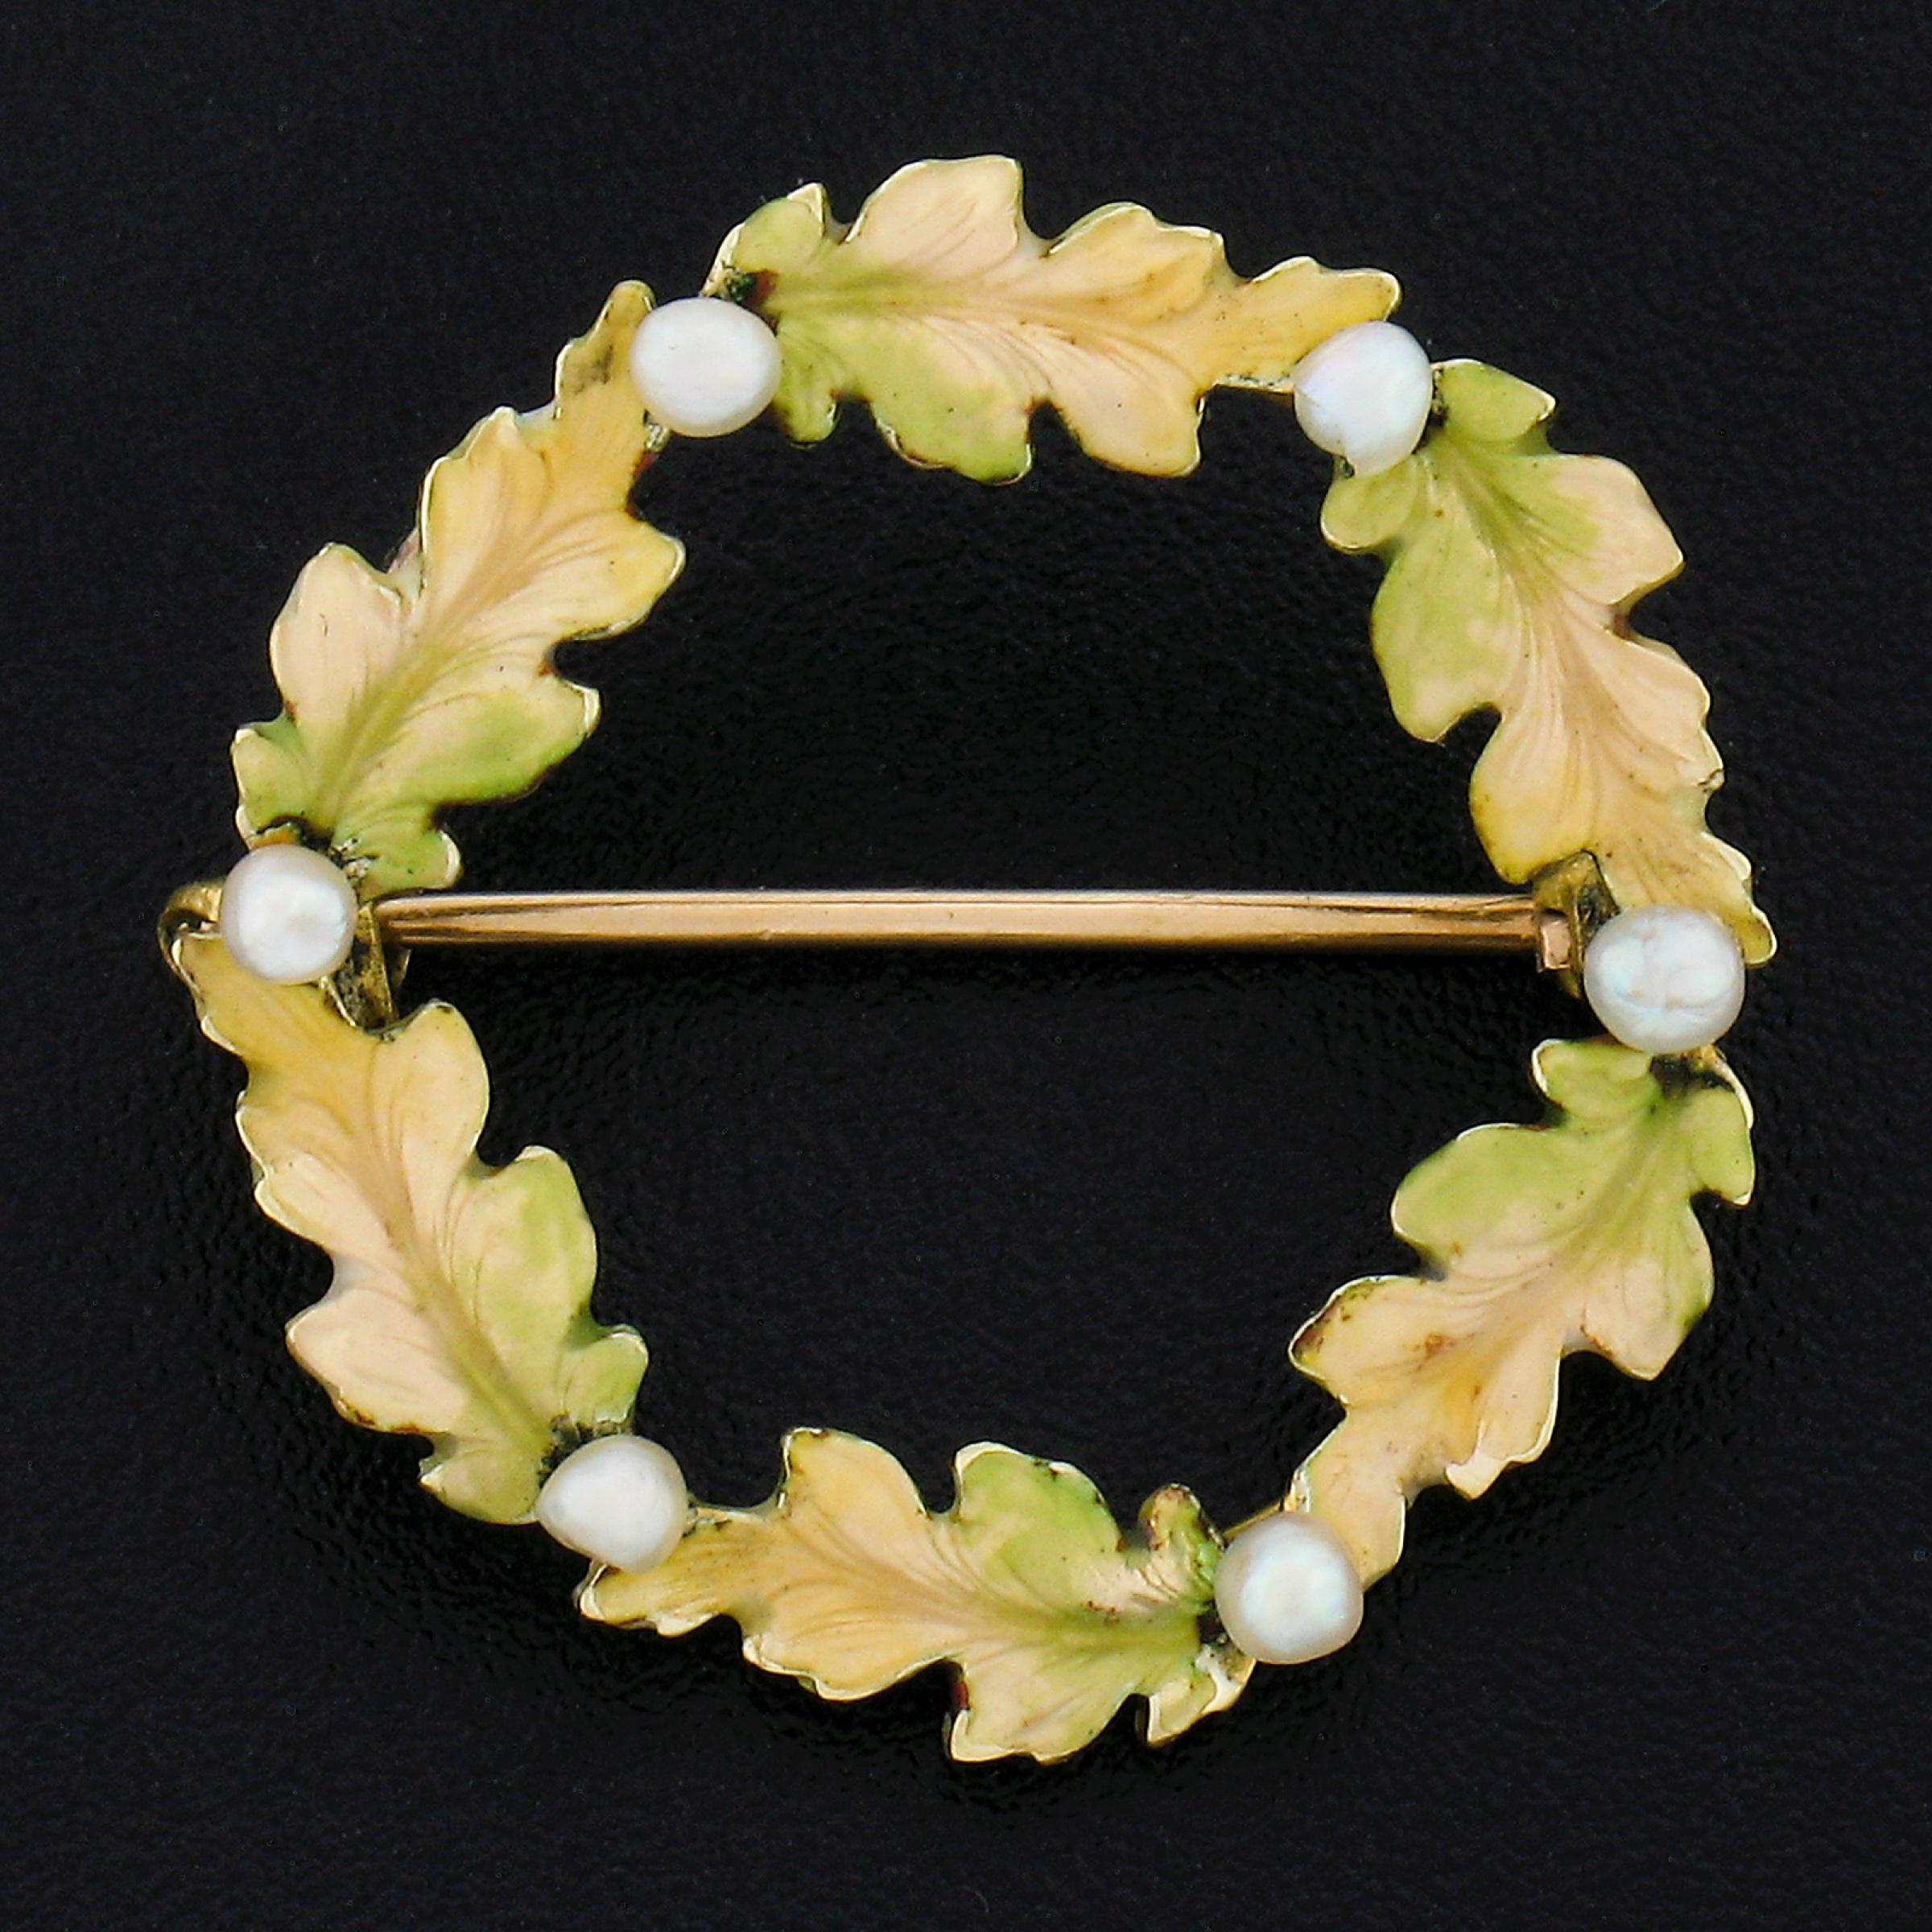 This beautiful antique brooch/pin was crafted during the art nouveau era in solid 14k yellow gold and features a lovely leaf circle wreath design. The wreath is adorned with beautiful leaves that are covered with matte finish light yellow and green